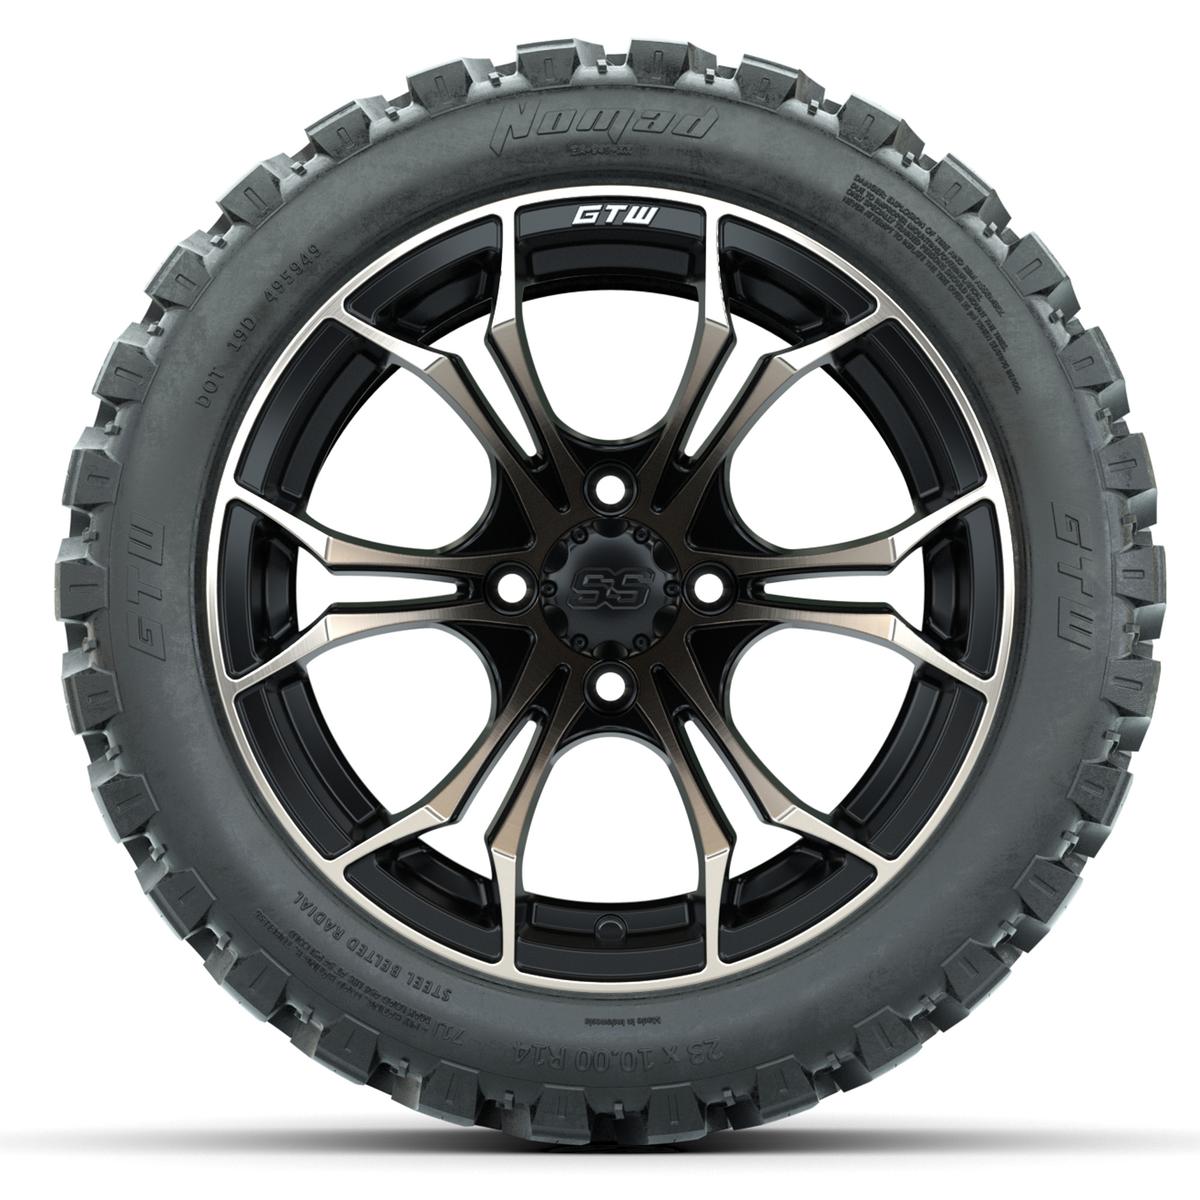 GTW Spyder Bronze/Matte Black 14 in Wheels with 23x10-14 GTW Nomad All-Terrain Tires – Full Set